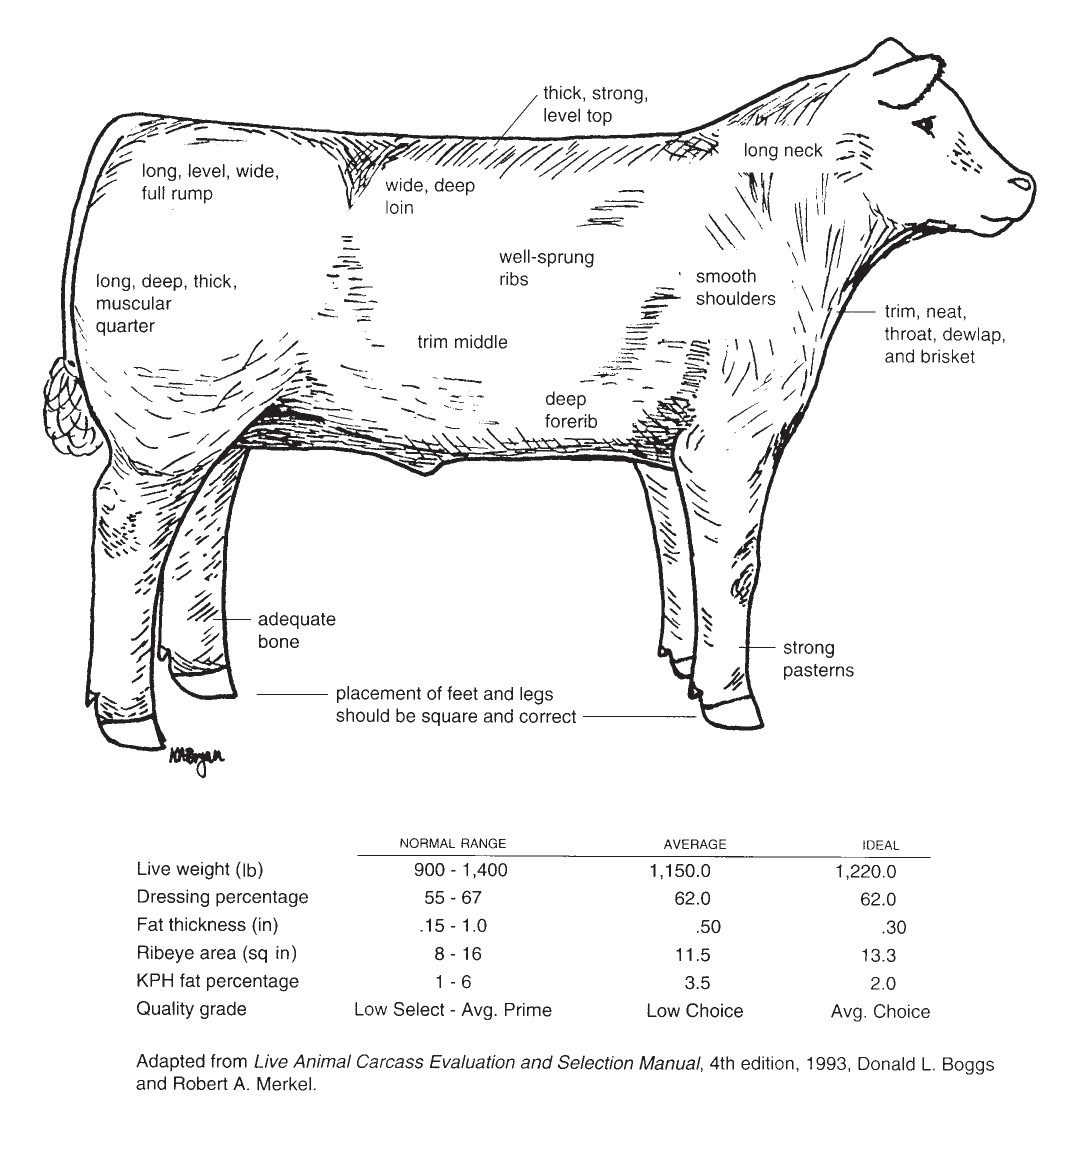 Diagram of the characteristics of an ideal market steer.